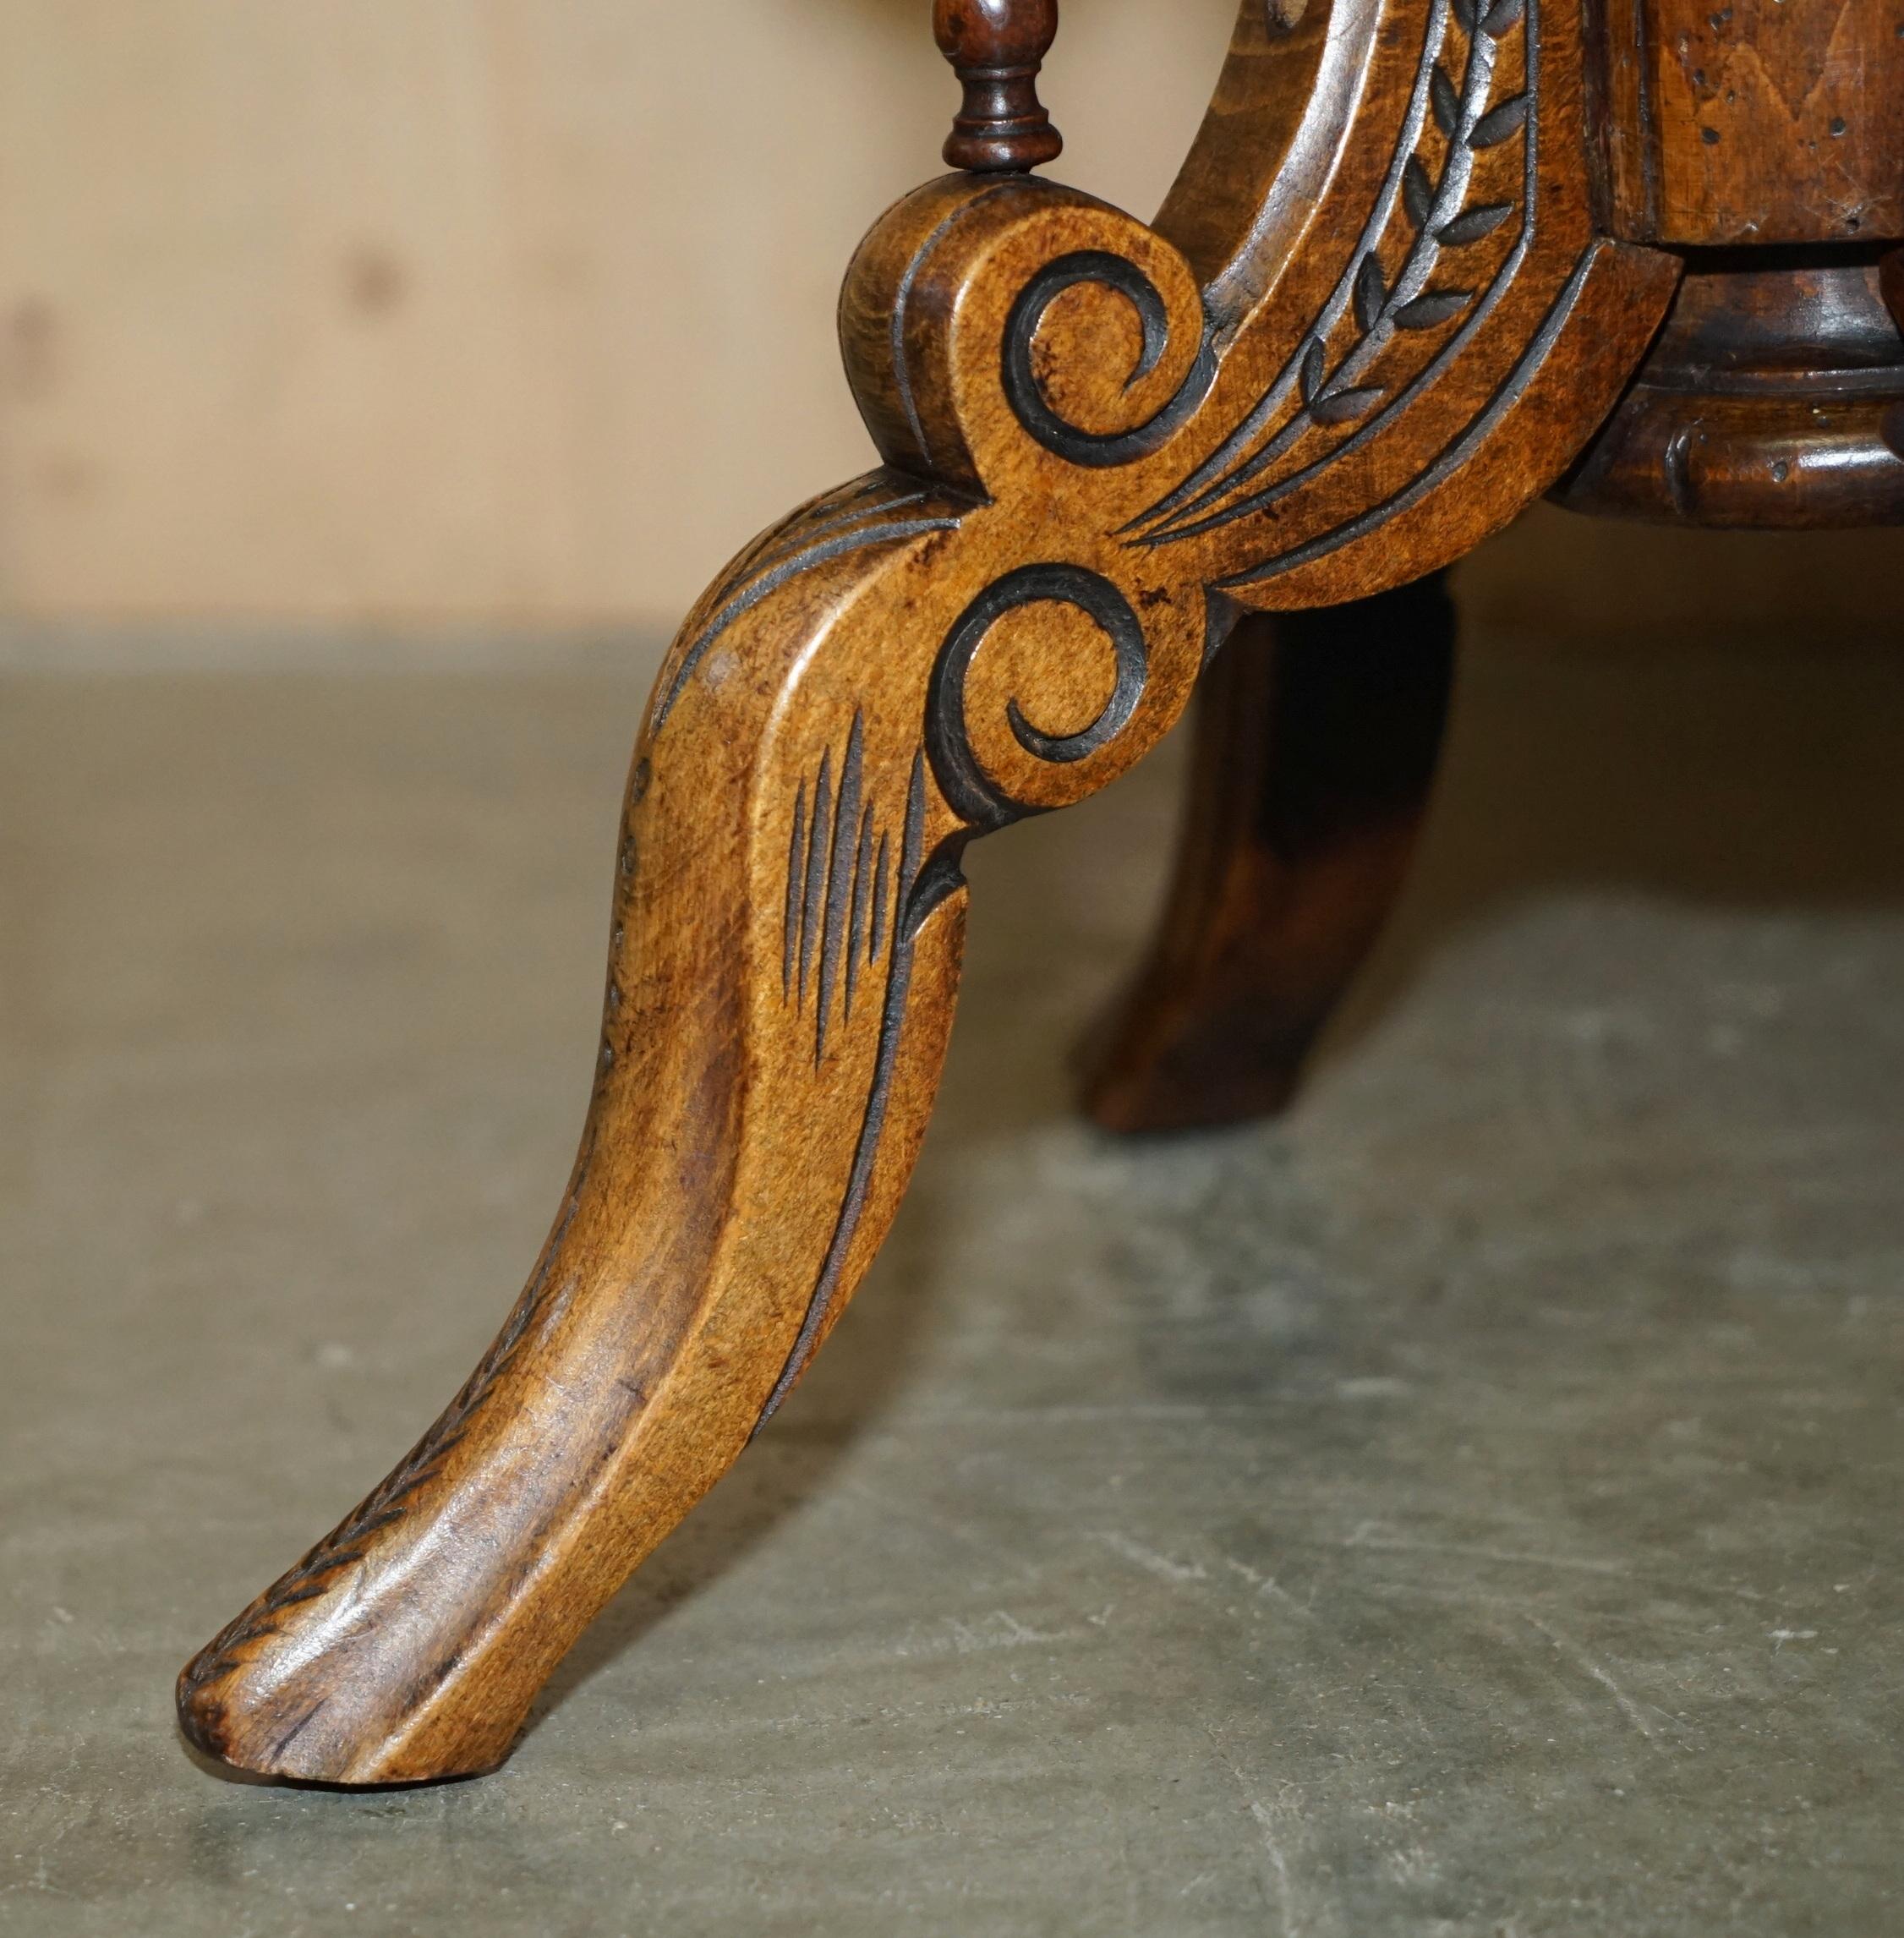 ANTIQUE ViCTORIAN WALNUT MUSIC DRESSING TABLE STOOL DECORATIVE BASE CURVED SEAT For Sale 4